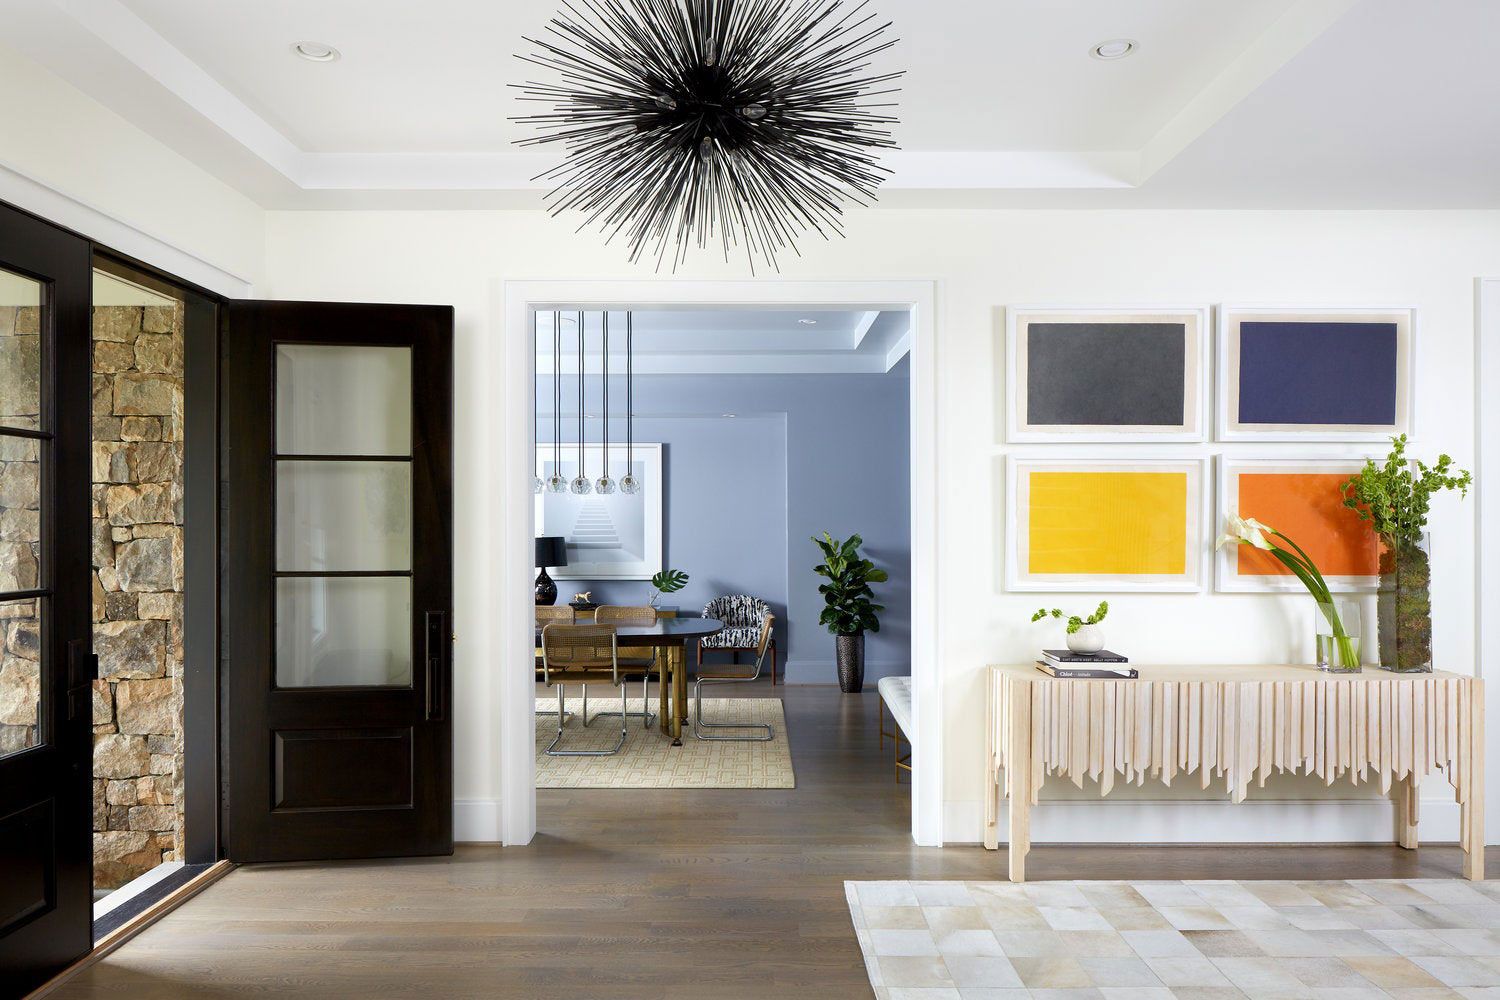 a home entryway with a black door and light fixture, with white walls and colorful art